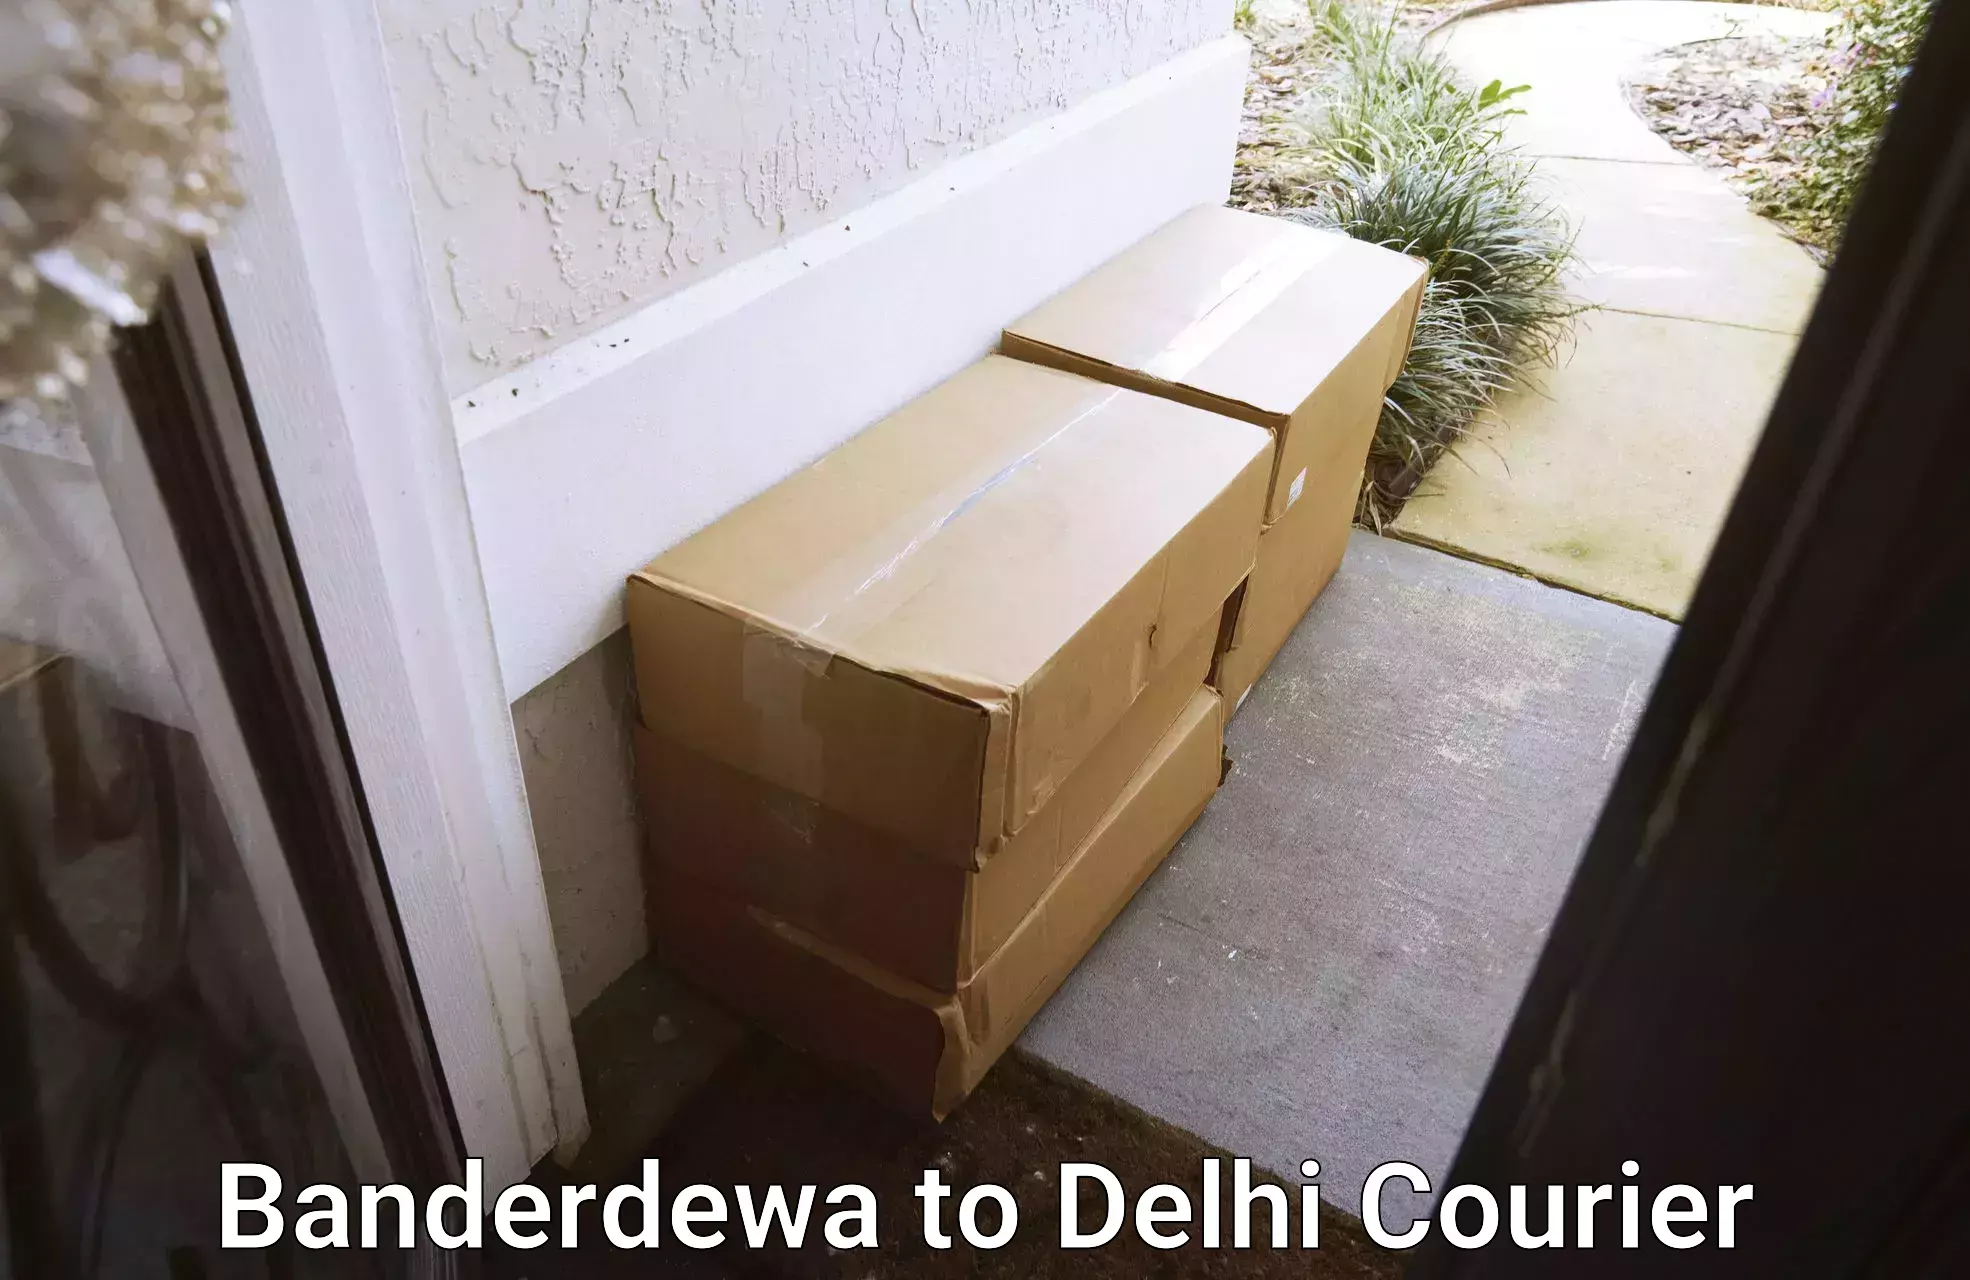 Quality courier services Banderdewa to Lodhi Road